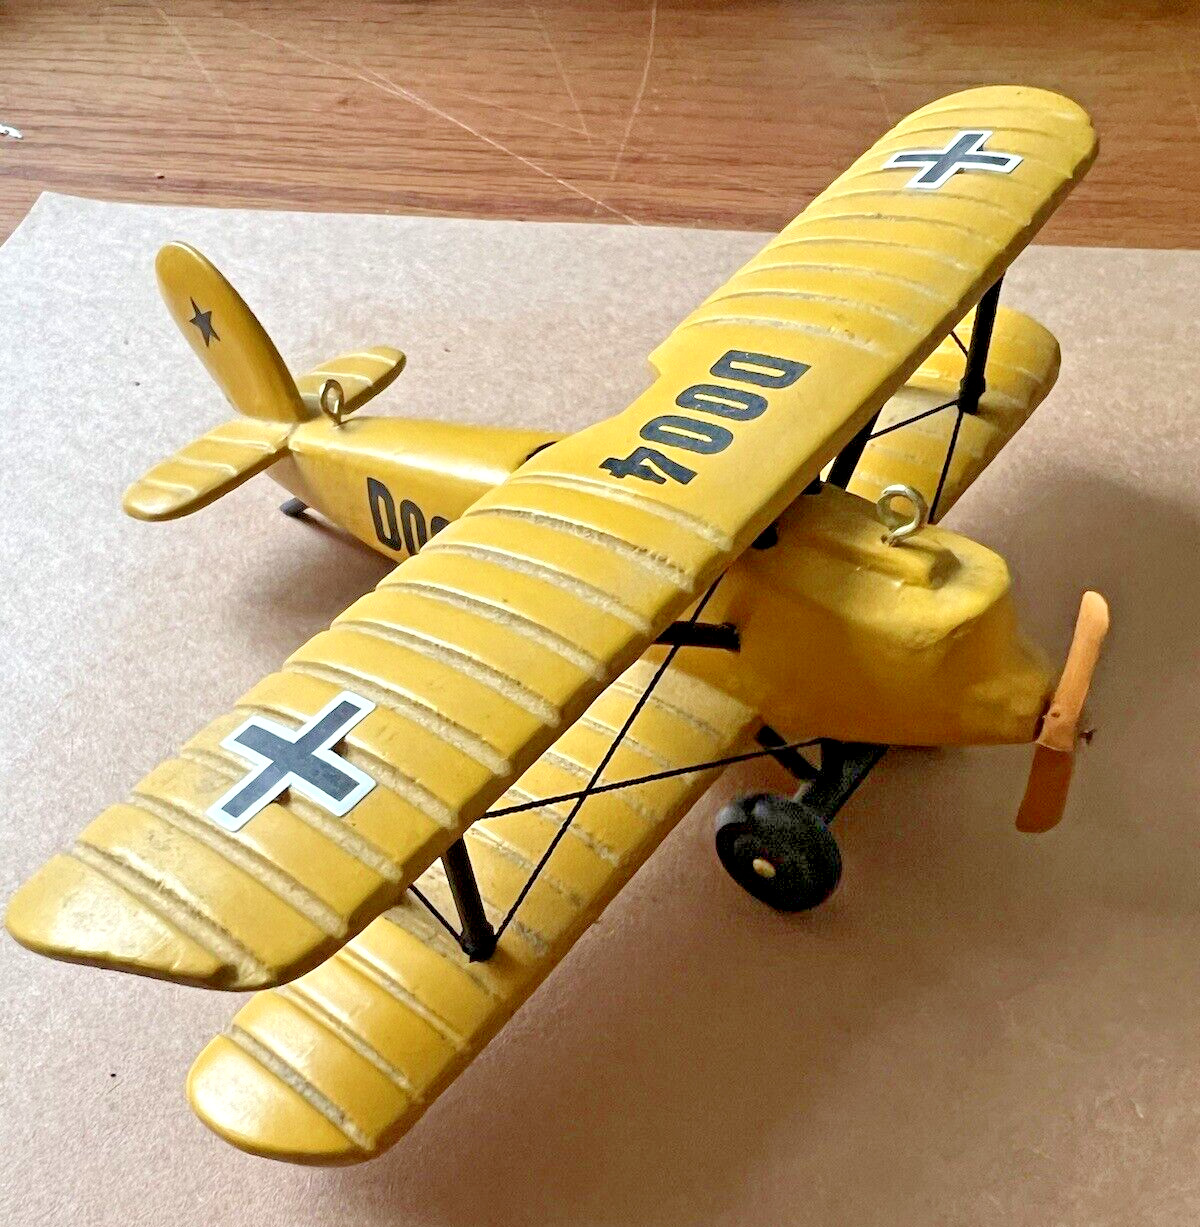 Vintage 1960's-70's Yellow D004 Biplane Wooden Model Airplane